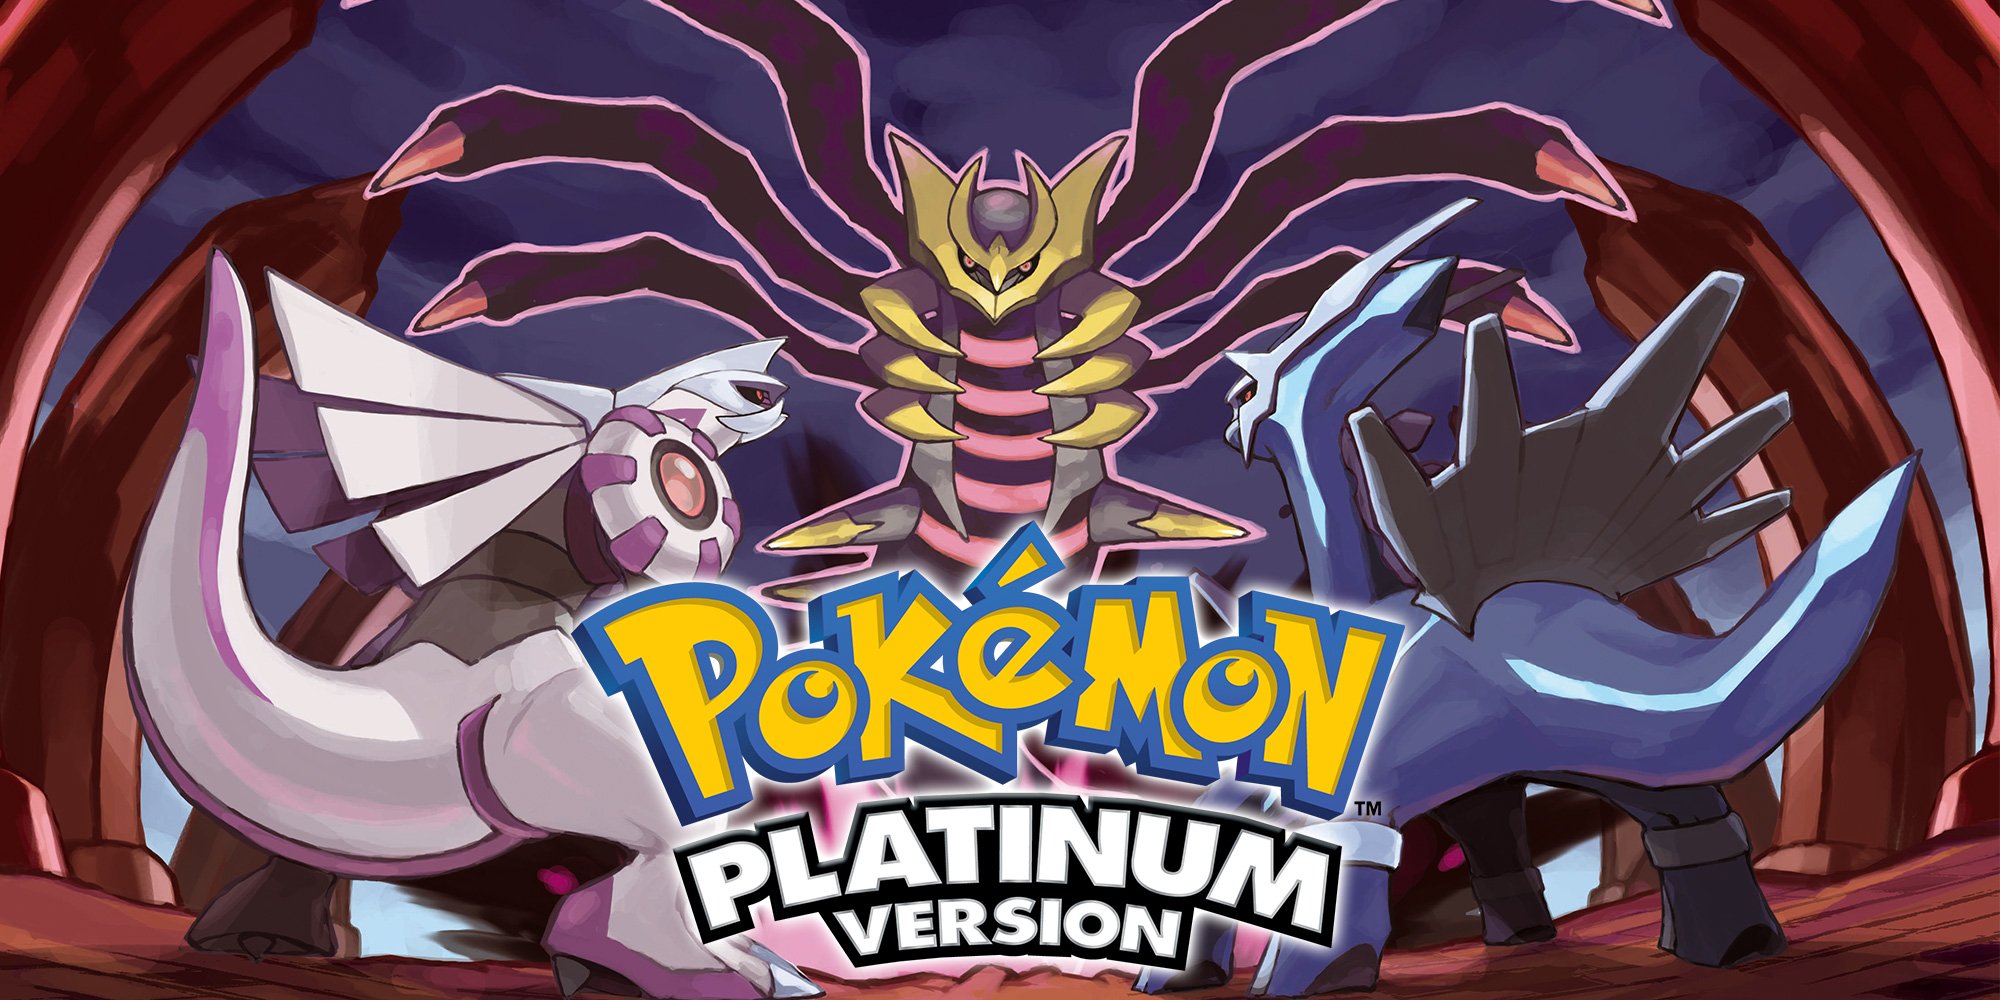 Pokemon Platinum Part #19 - Some Sort of Title with Solace In It